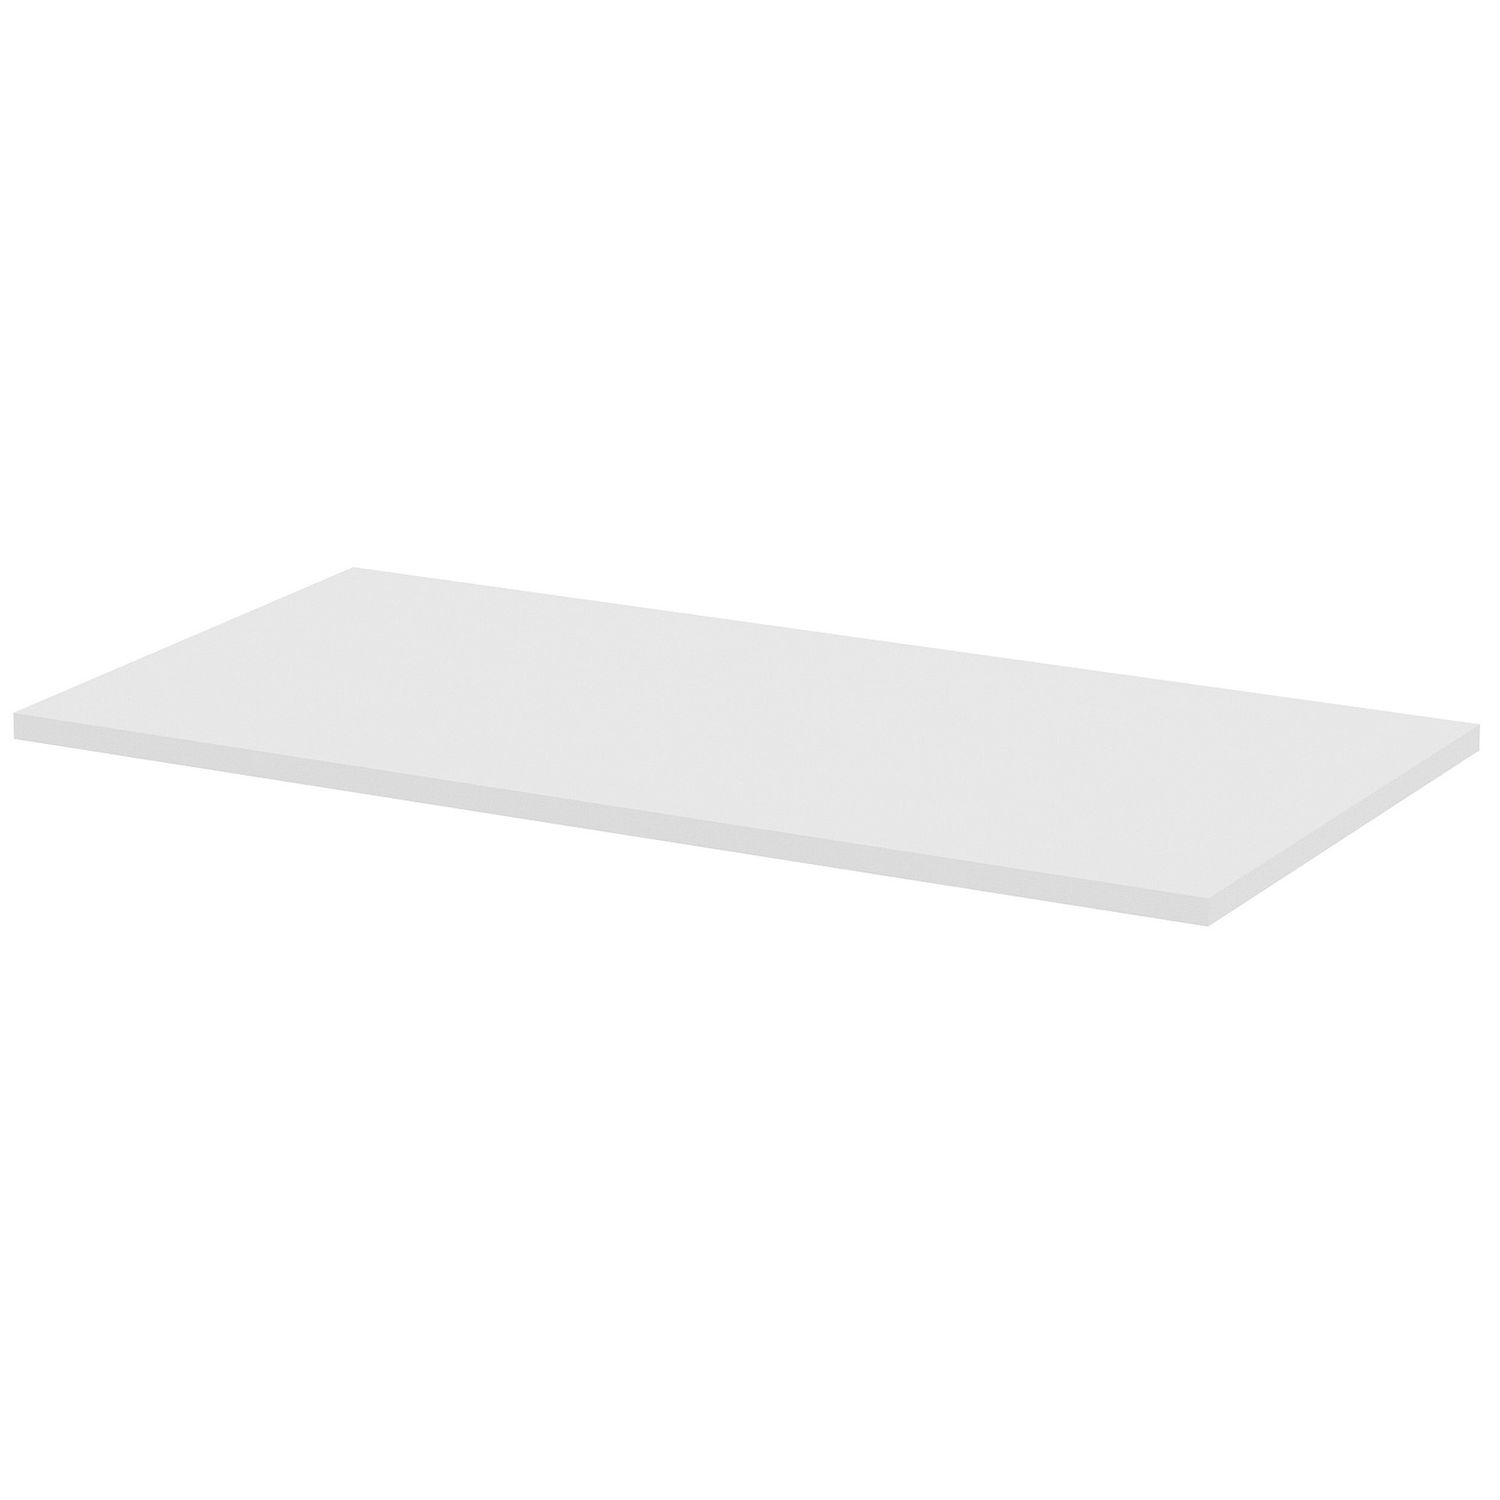 Width-Adjustable Training Table Top White Rectangle Top, 48" Table Top Length x 24" Table Top Width x 1" Table Top Thickness, Assembly Required